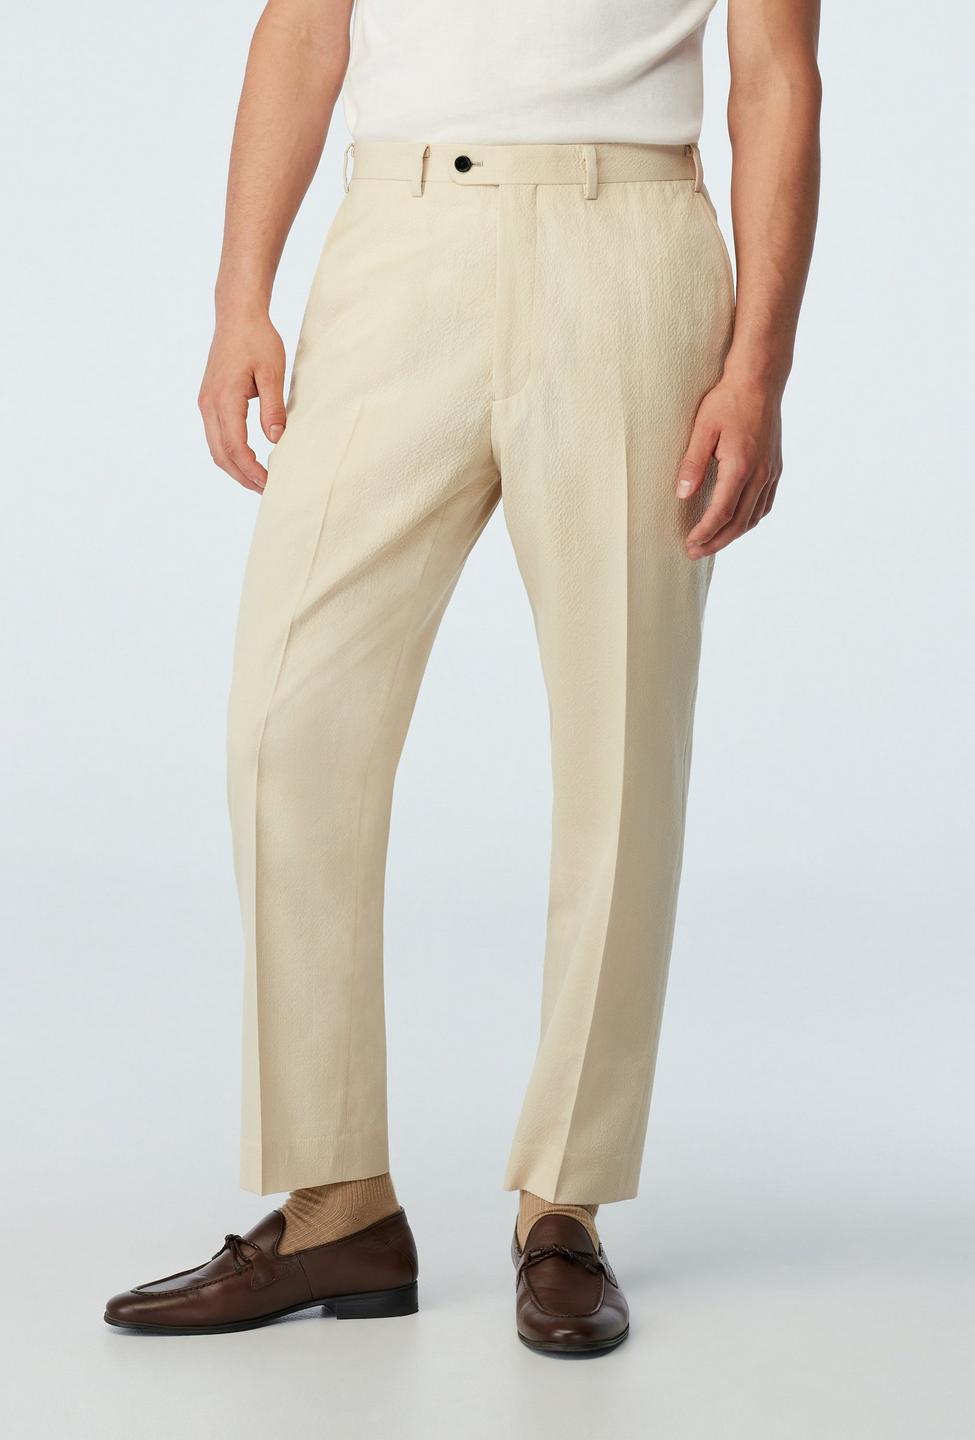 Cream pants - Stapleford Solid Design from Seasonal Indochino Collection